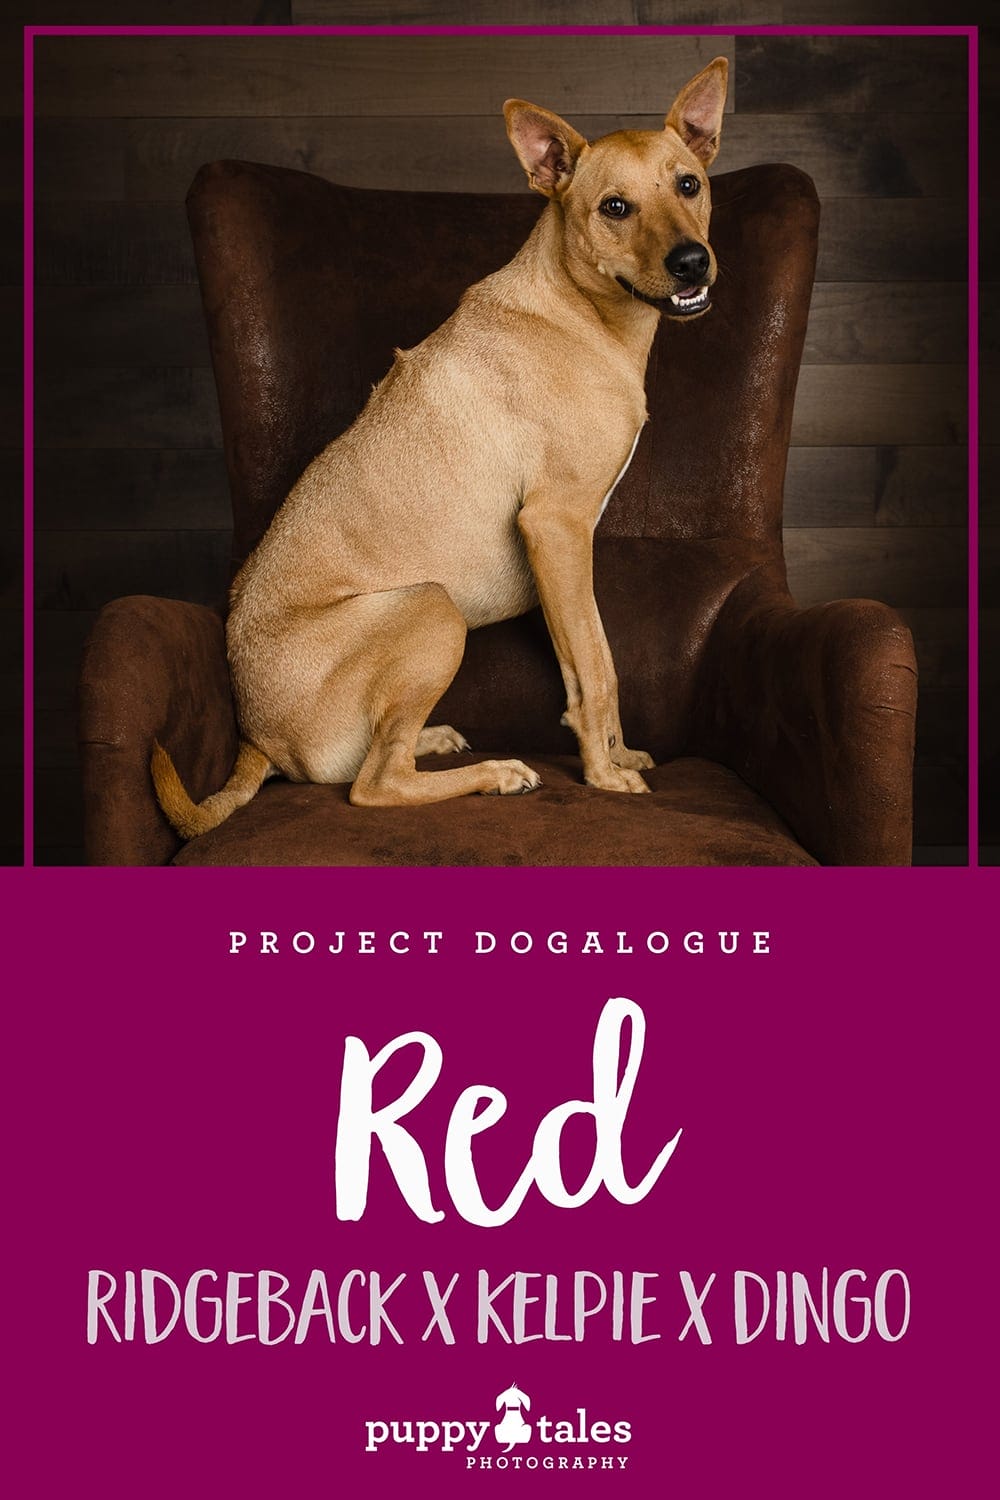 Red, the Ridgeback cross Kelpie cross Dingo, photographed by Kerry Martin of Puppy Tales Photography for Project Dogalogue. Pinterest graphic for his blog post.